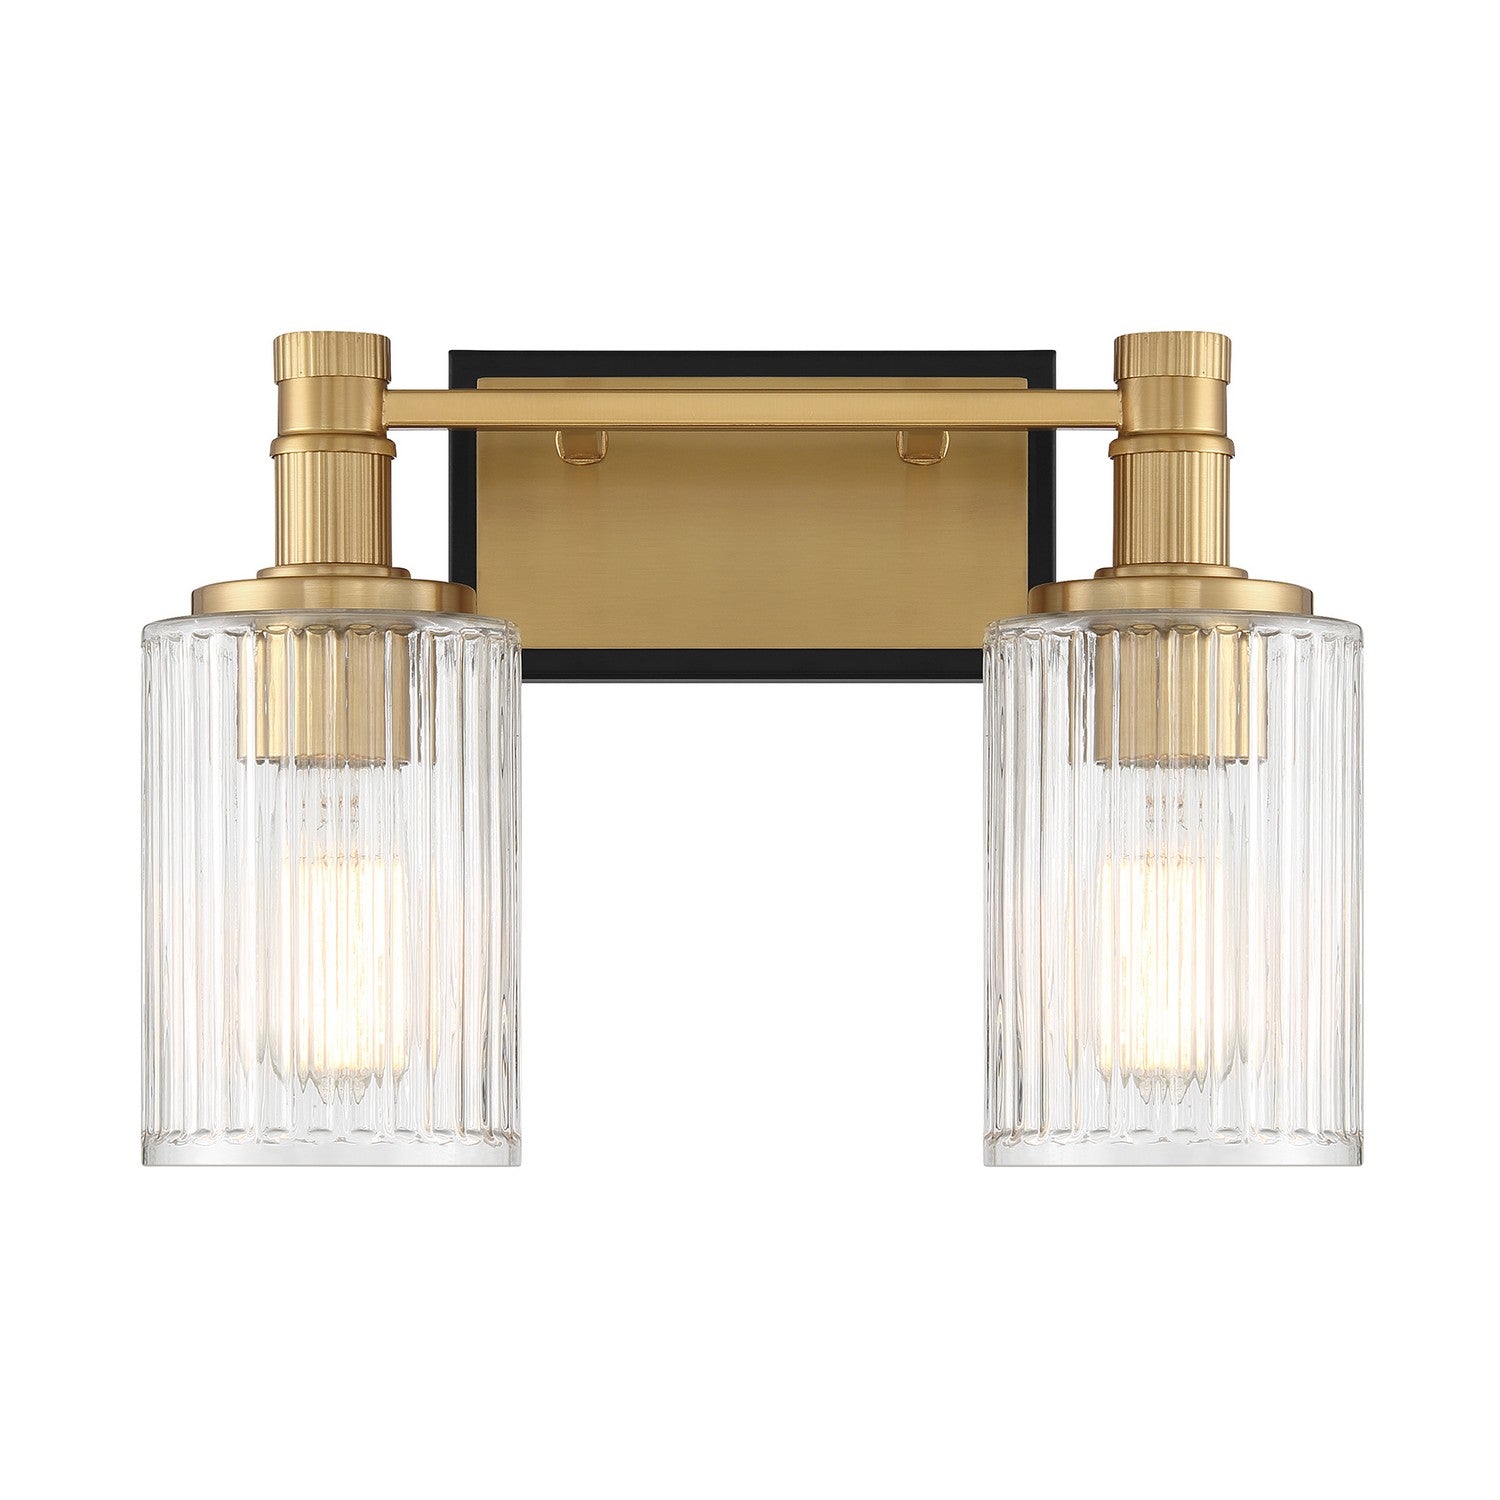 Savoy House - 8-1102-2-143 - Two Light Bathroom Vanity - Concord - Matte Black with Warm Brass